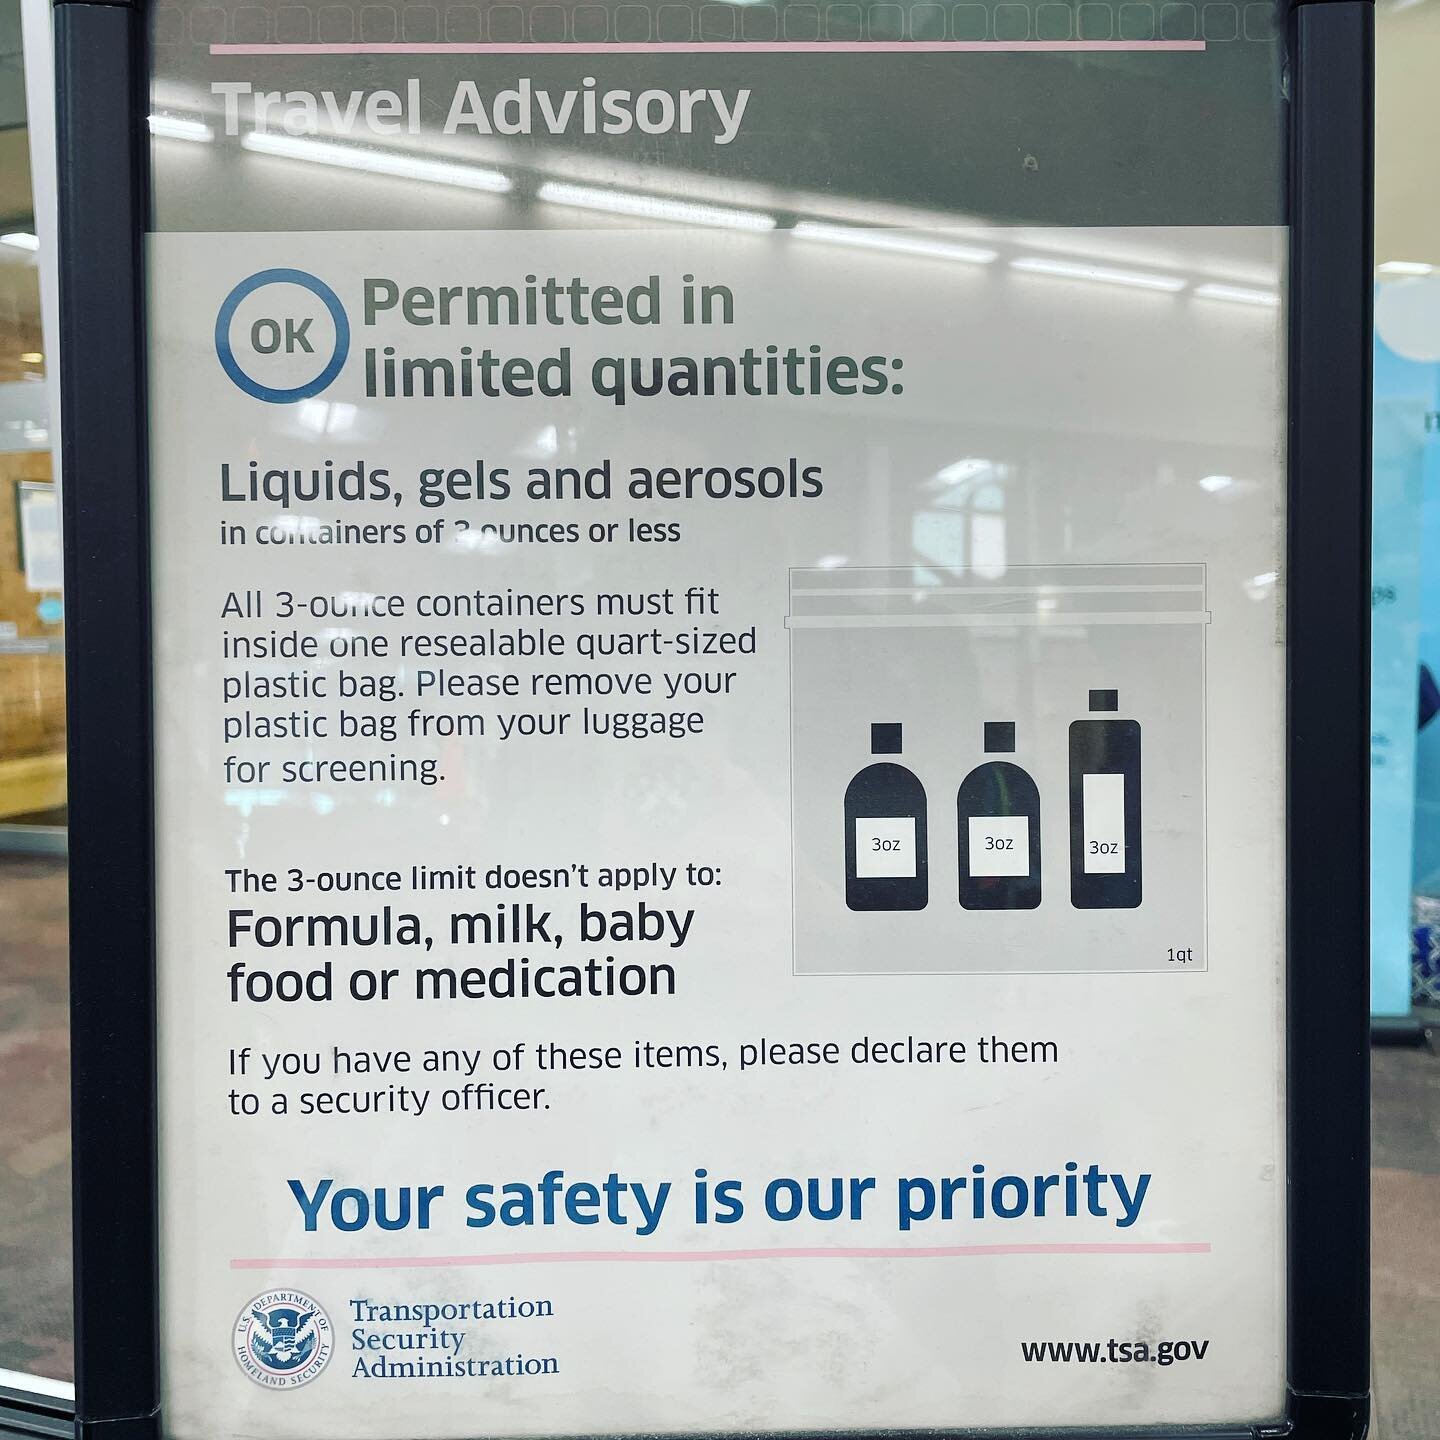 The 100ml limit doesn&rsquo;t apply to human milk, formula, or juice for a toddler. 🍼✈️

I couldn&rsquo;t find the upper limit of amounts allowed through TSA in the US explicitly stated online. I did, however, learn that coolers of milk and breast p